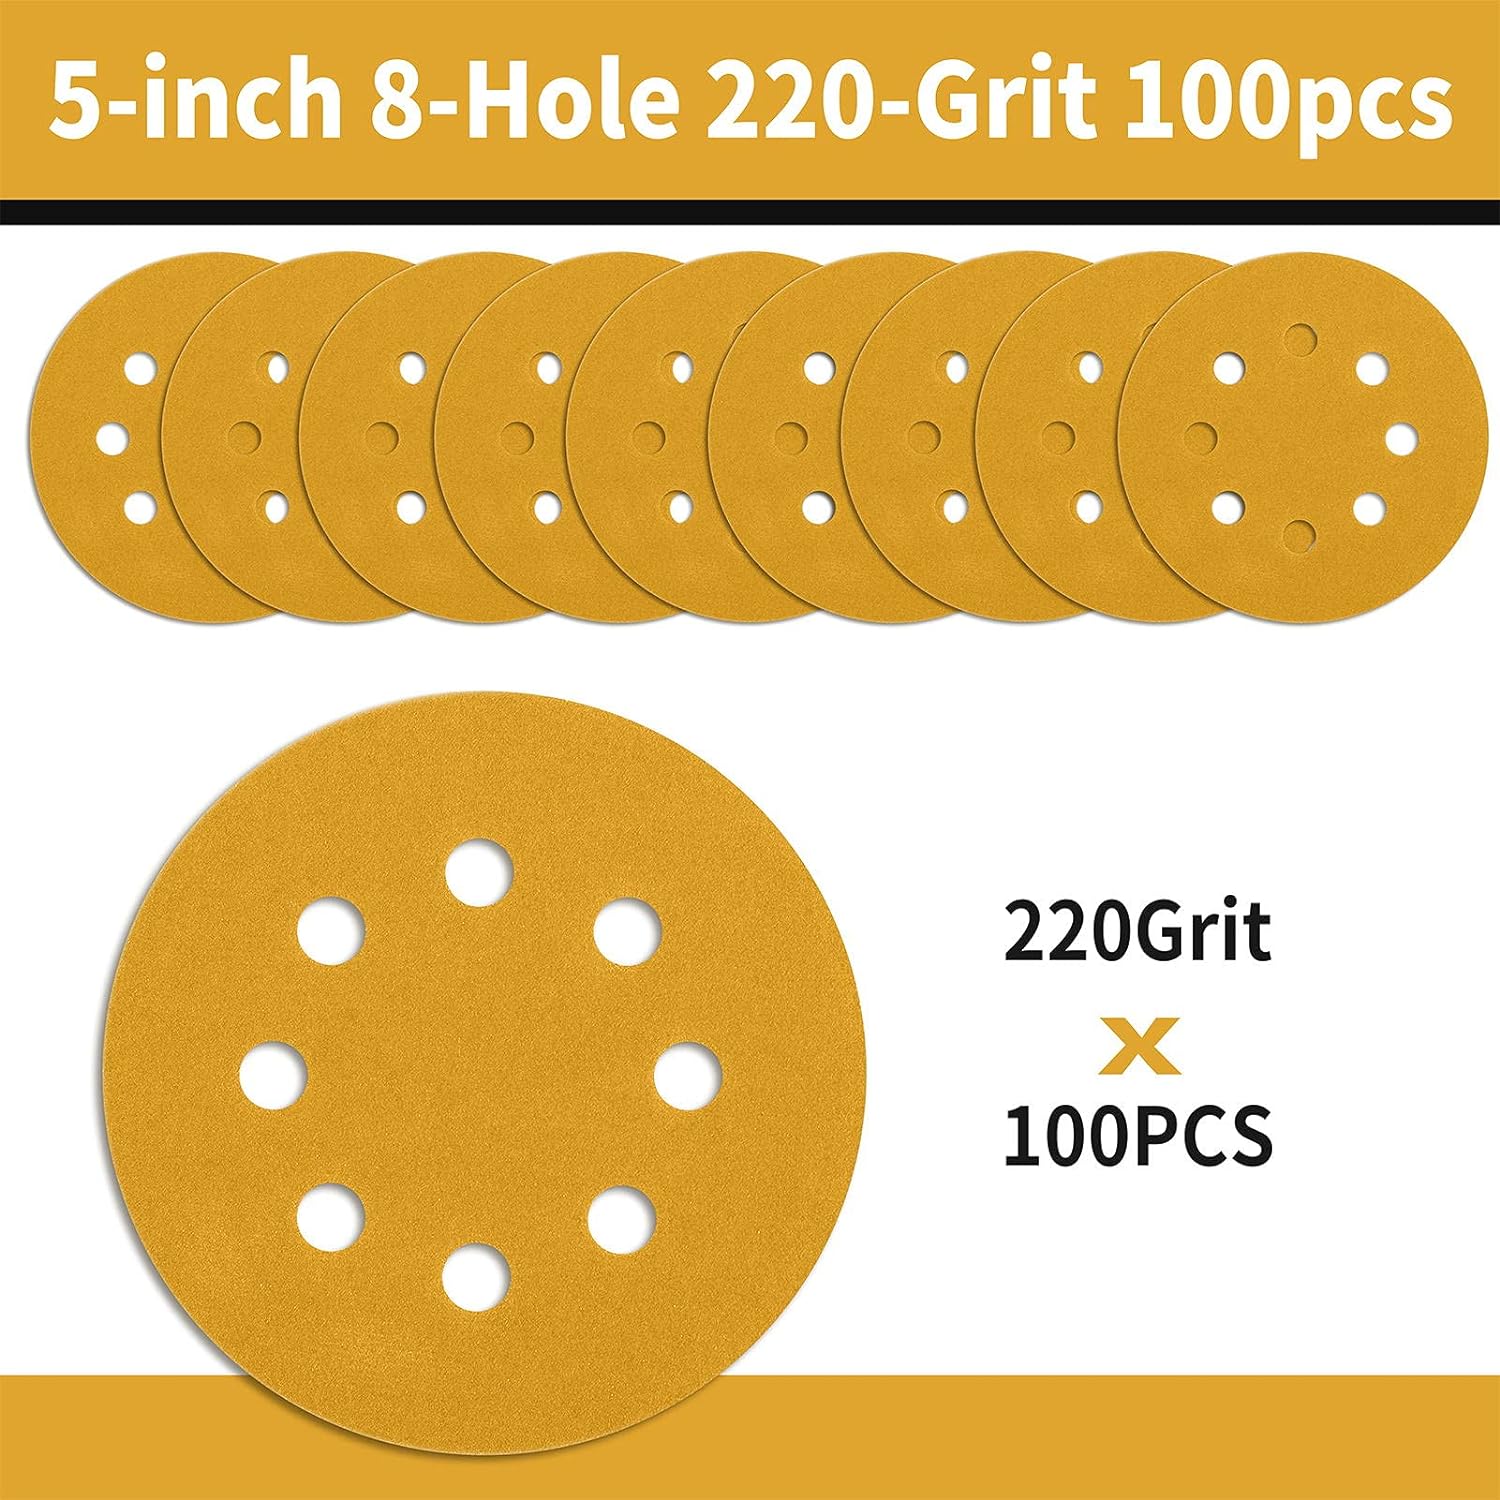 keeimp 100 Pcs 5 Inch Sanding Discs Hook and Loop, 220 Grit Sandpaper for Woodworking or Automotive, 8 Hole Gold Premium Dustless Rand